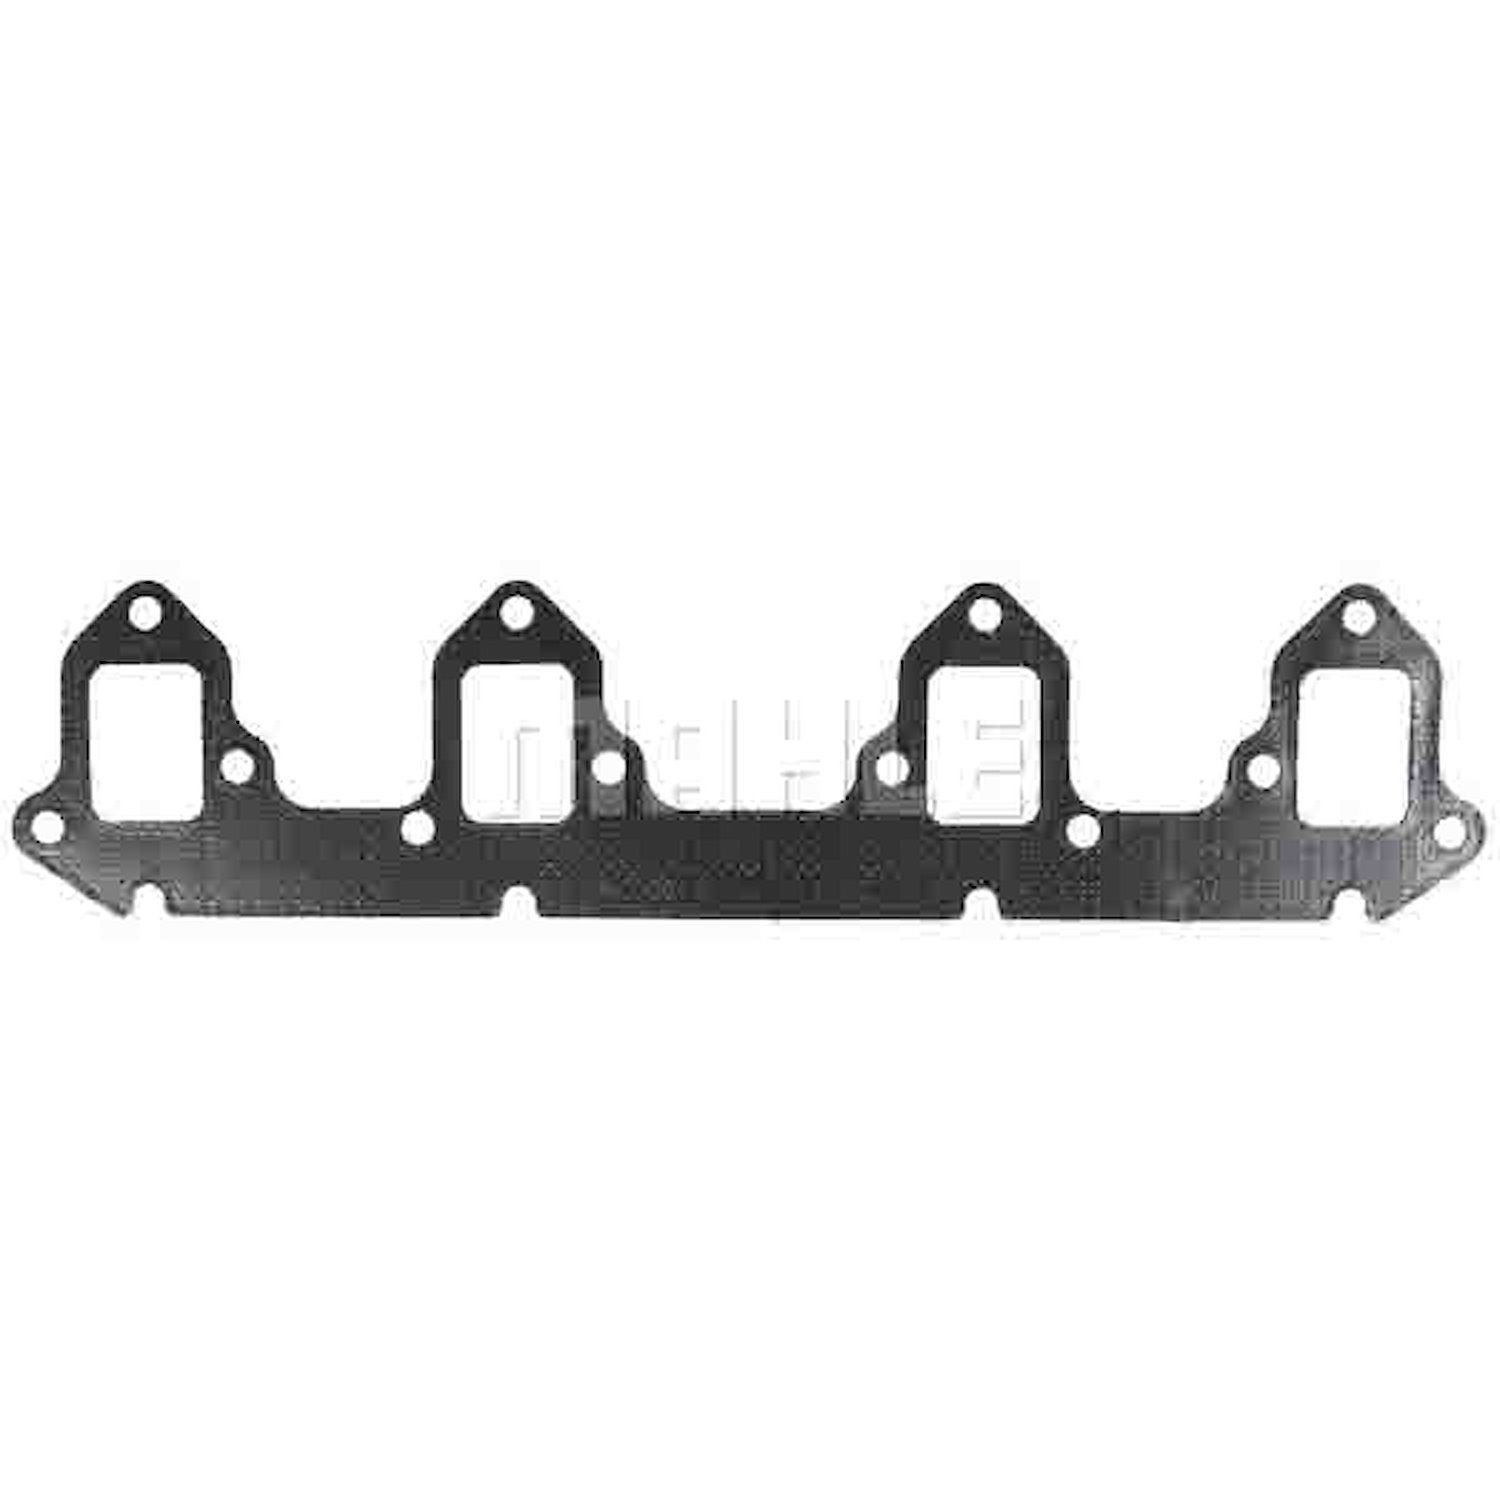 Exhaust Header Gasket Set for Ford FE 390-428 [Graphite 1.400 x 1.900 in. Rectangle Port]